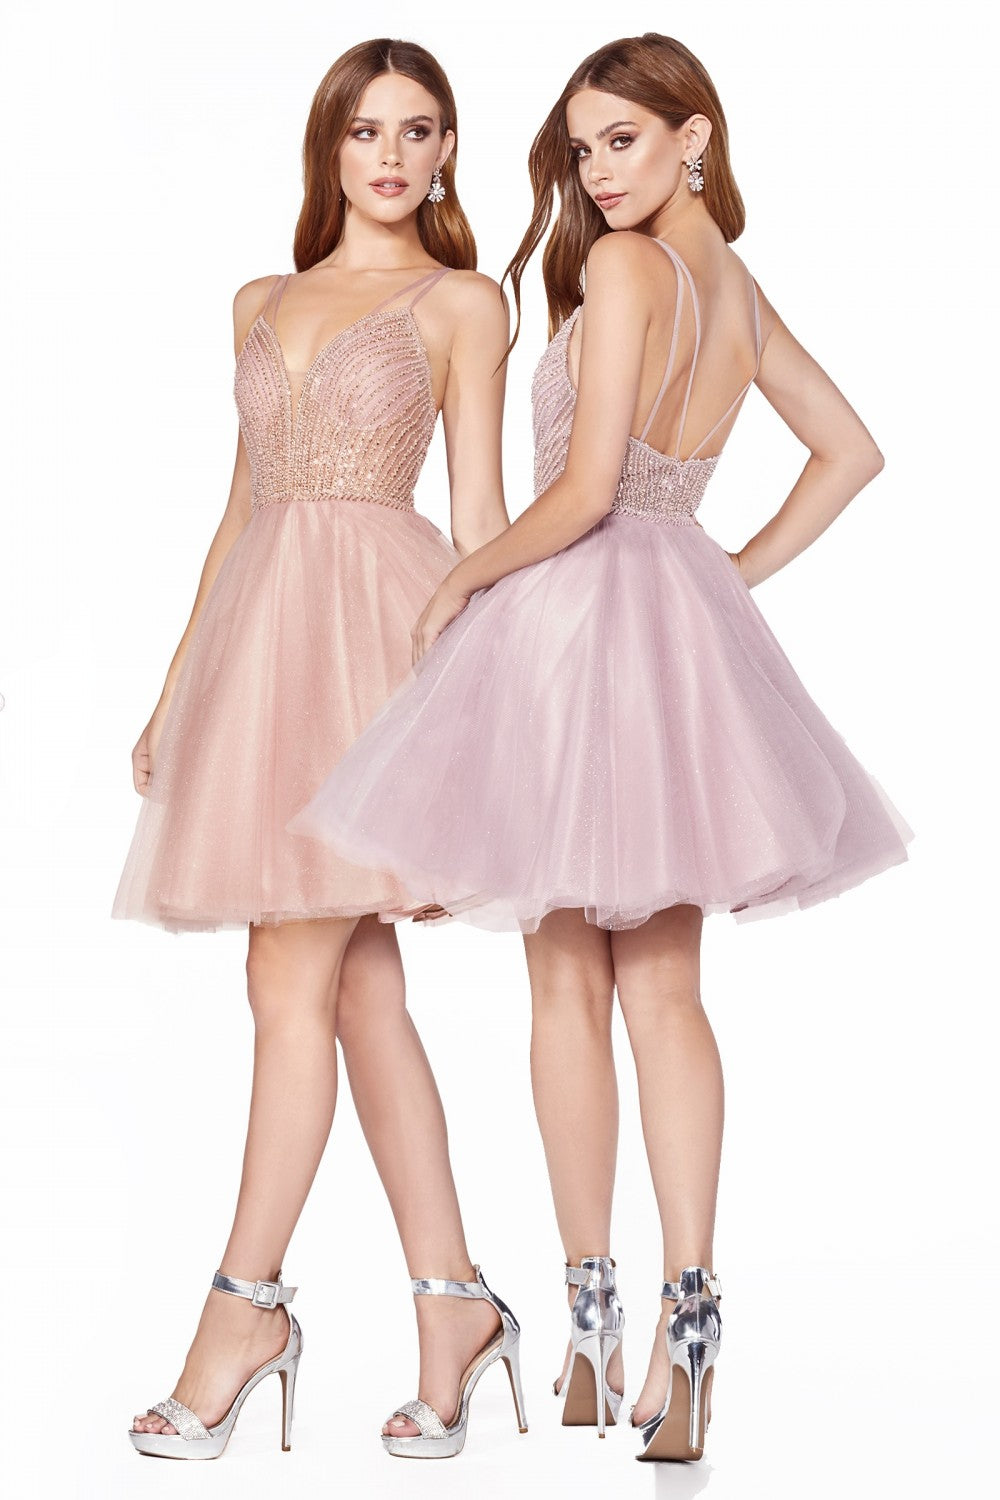 A-line Short Cocktail & Homecoming Dress Embellished Sleeveless Bodice Layered Tulle Glitter Skirt Playful Backless Style CDCD0148 Elsy Style Cocktail Dress